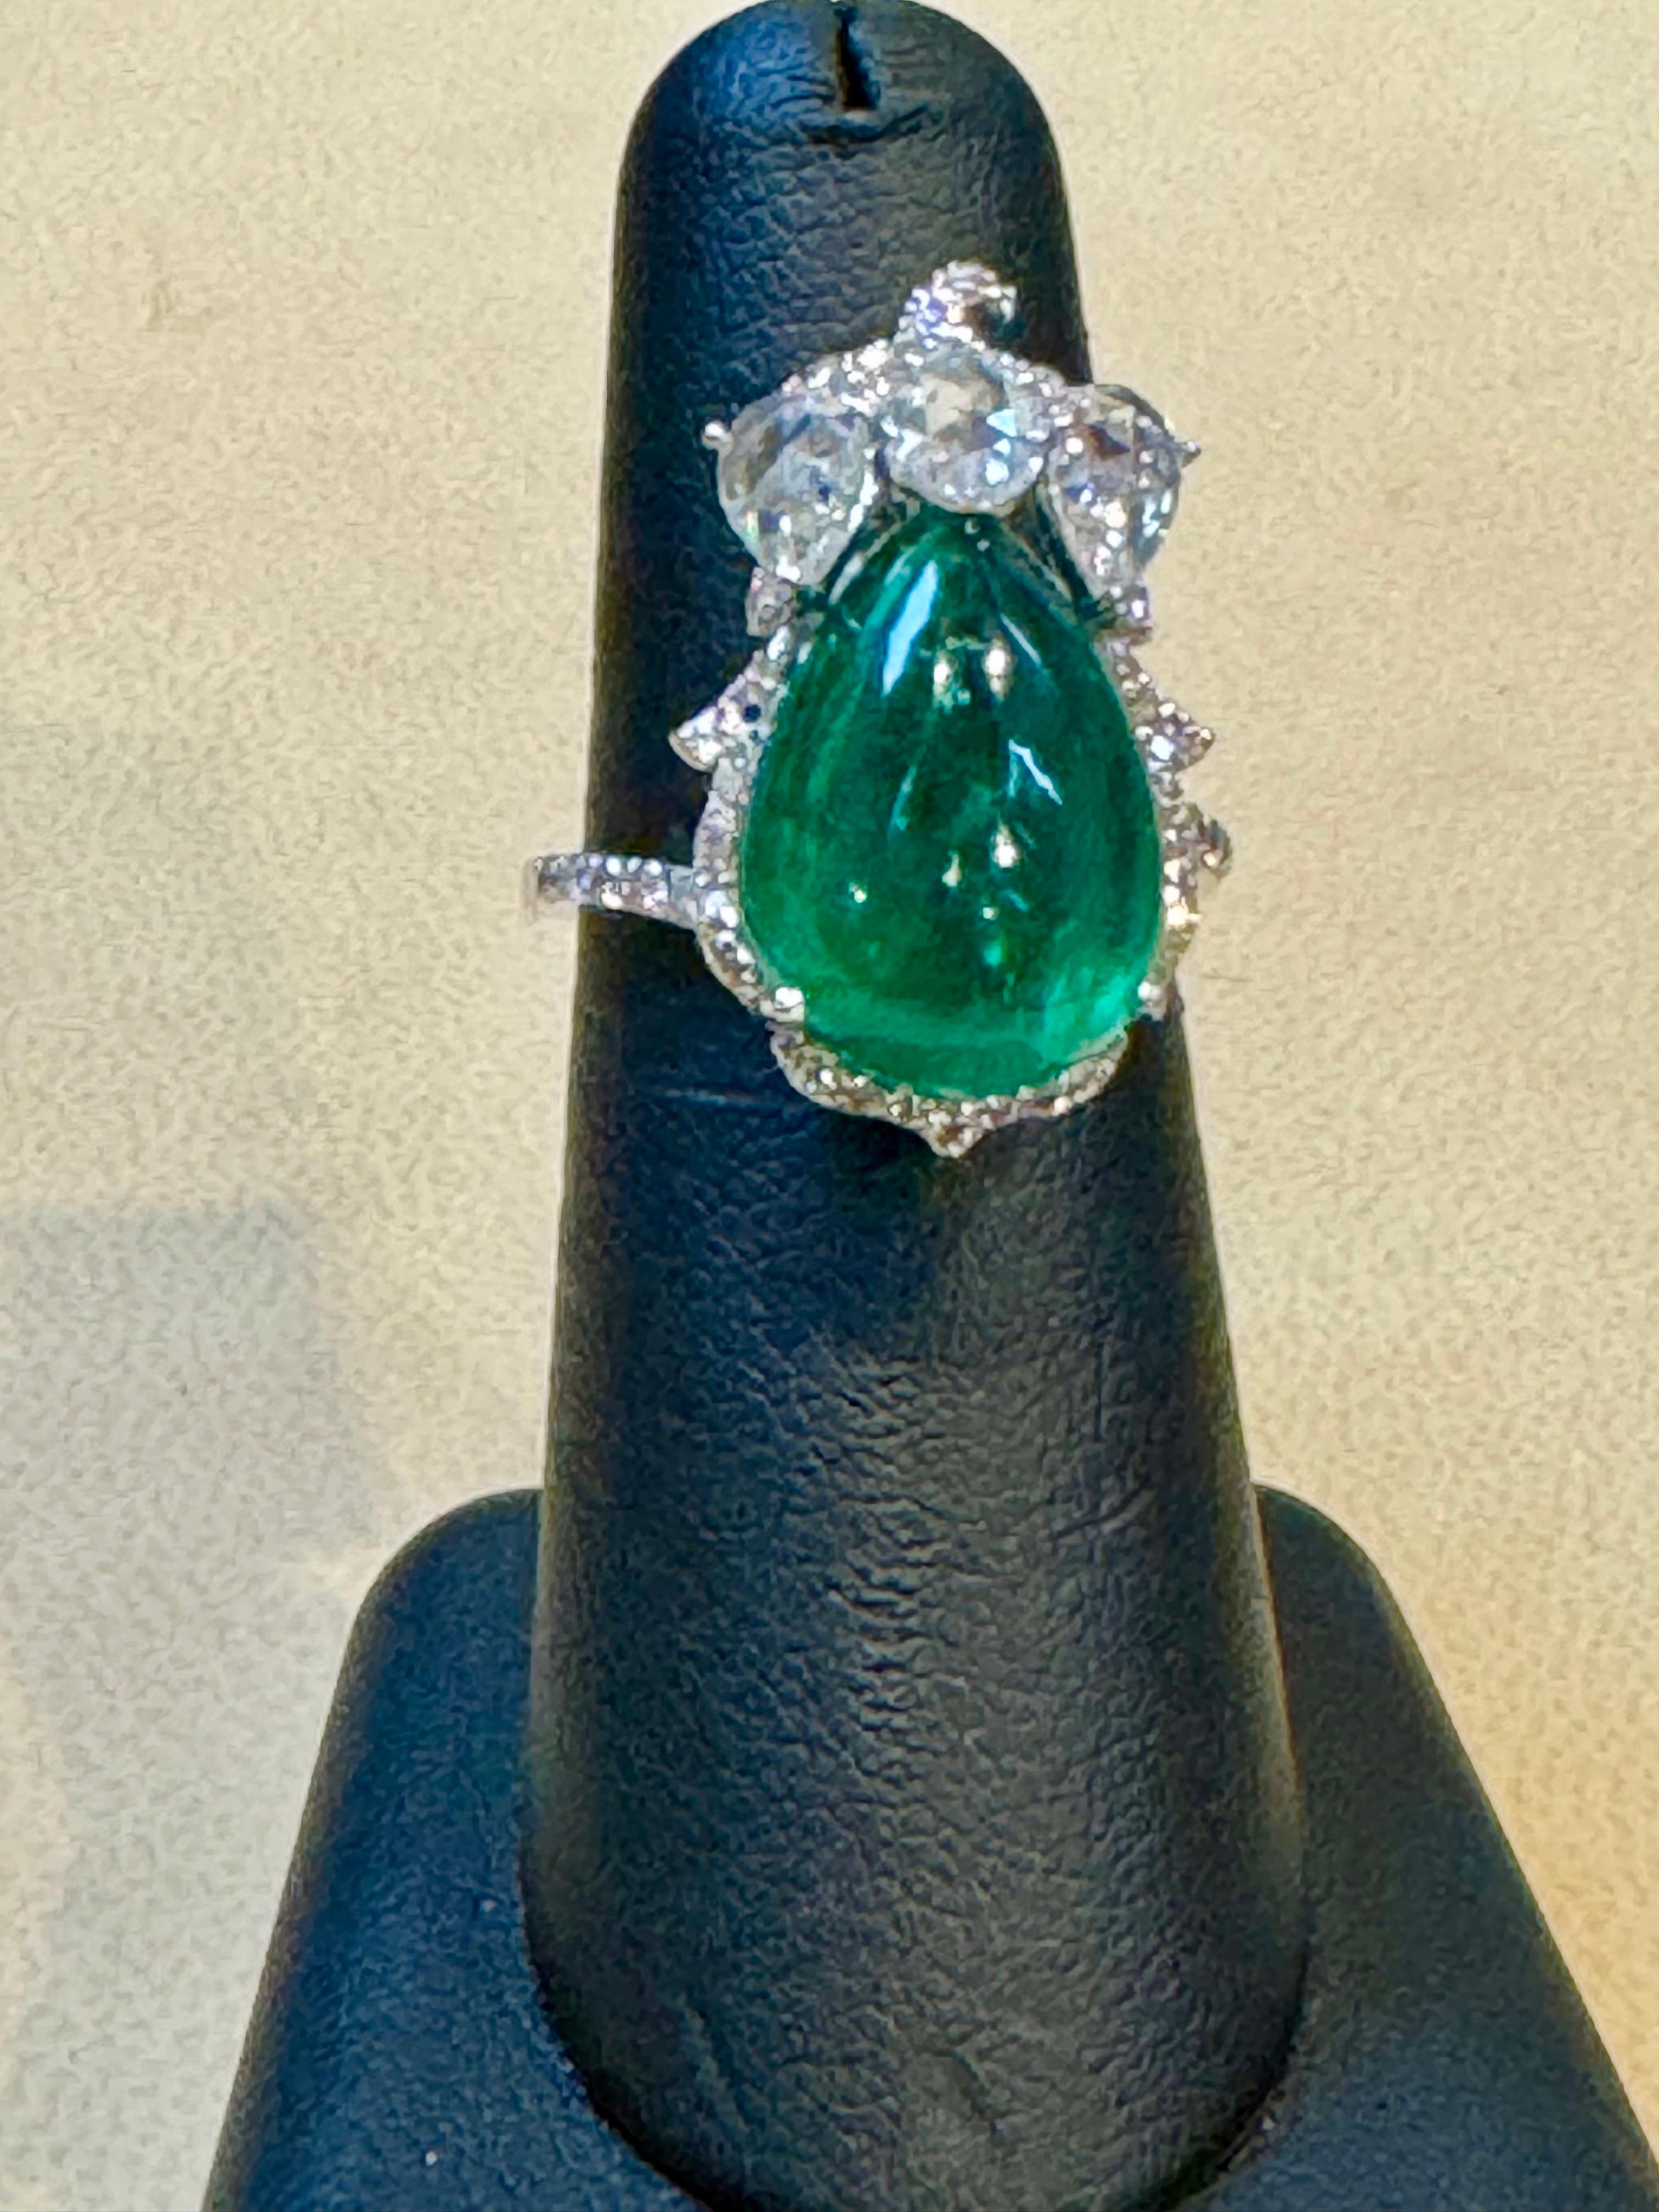 9 Ct Finest Zambian Sugar Loaf Emerald & 2 Ct Rose Cut Diamond Ring Size 7 In Excellent Condition For Sale In New York, NY